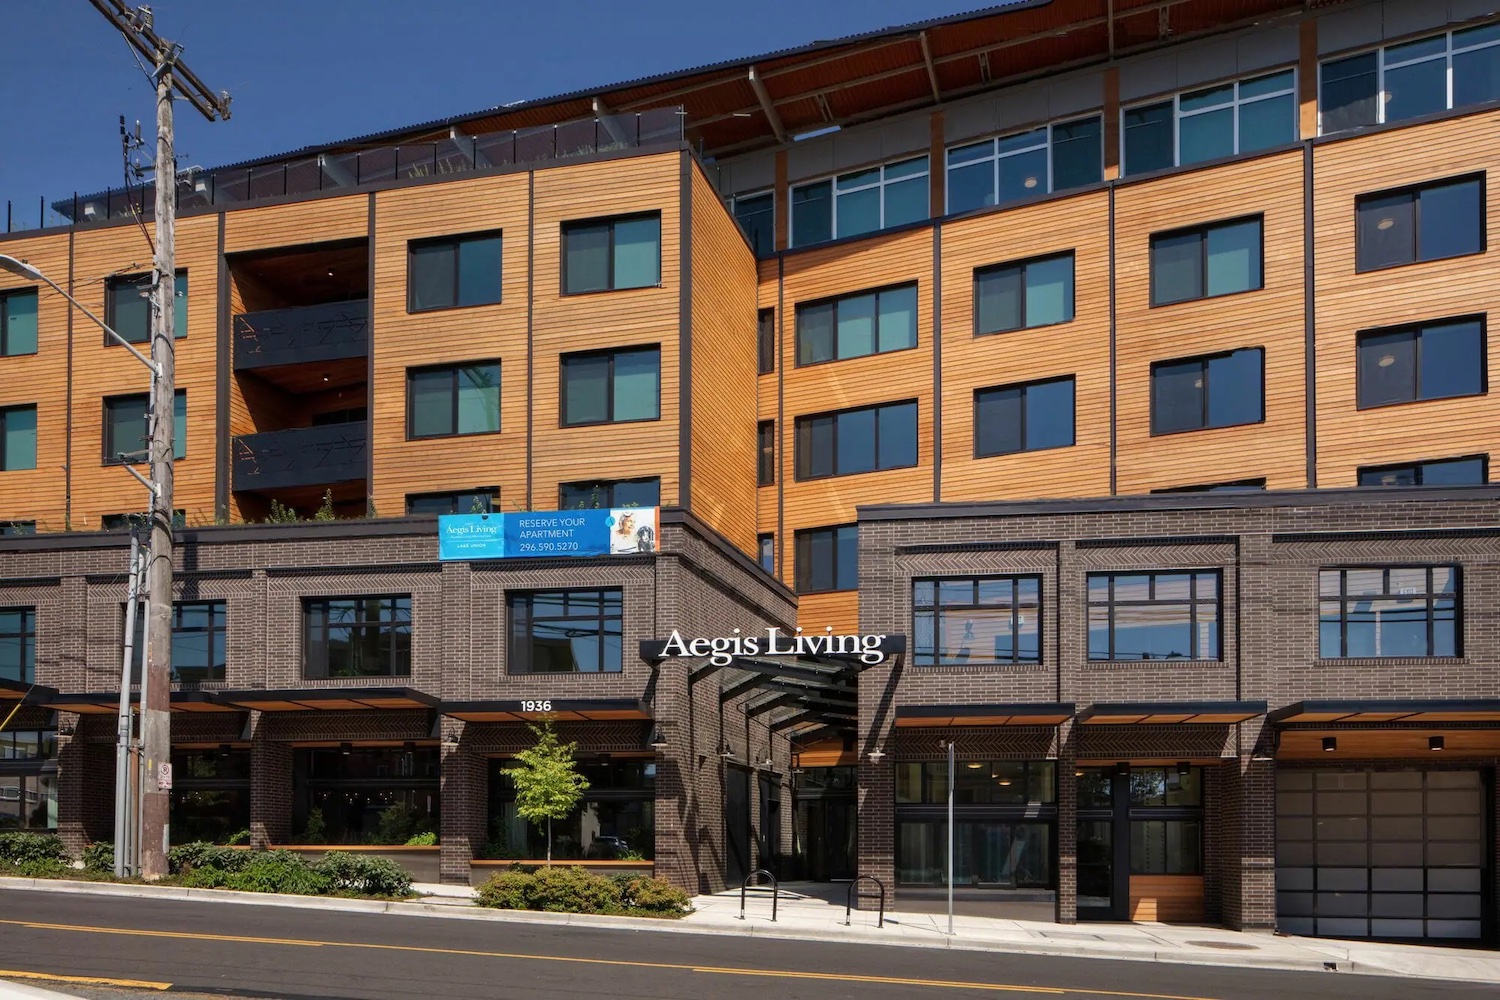 Aegis Living Lake Union senior living community in Seattle aims to be world’s first to achieve Living Building Challenge designation